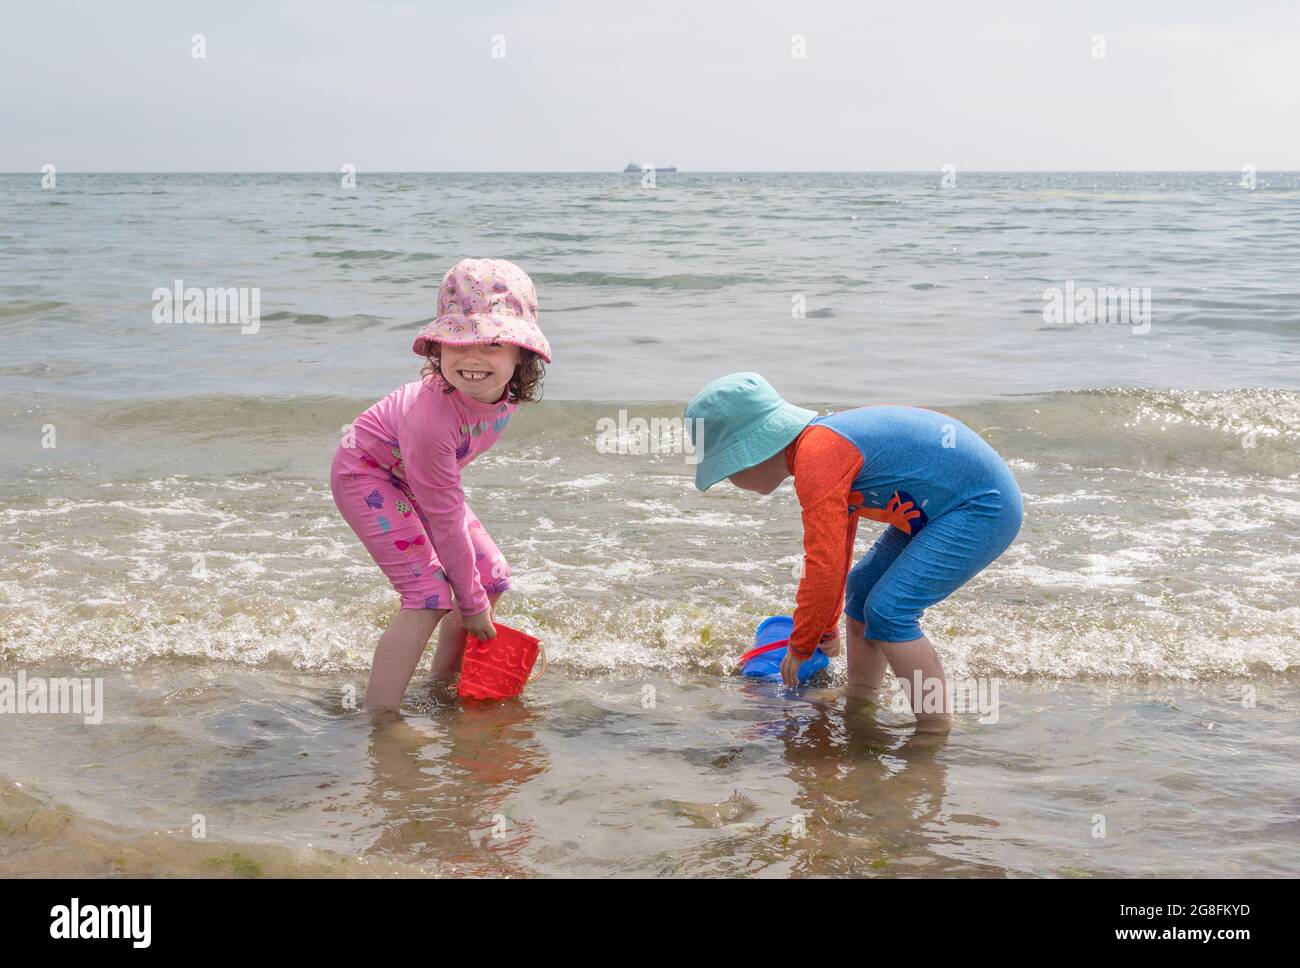 Fountainstown, Cork, Ireland. 20th July, 2021. As the heatwave continues, a brother and sister keep cool by playing in the water at Fountainstown Beach, Co. Cork, Ireland. - Picture; David Creedon / Alamy Live News Stock Photo